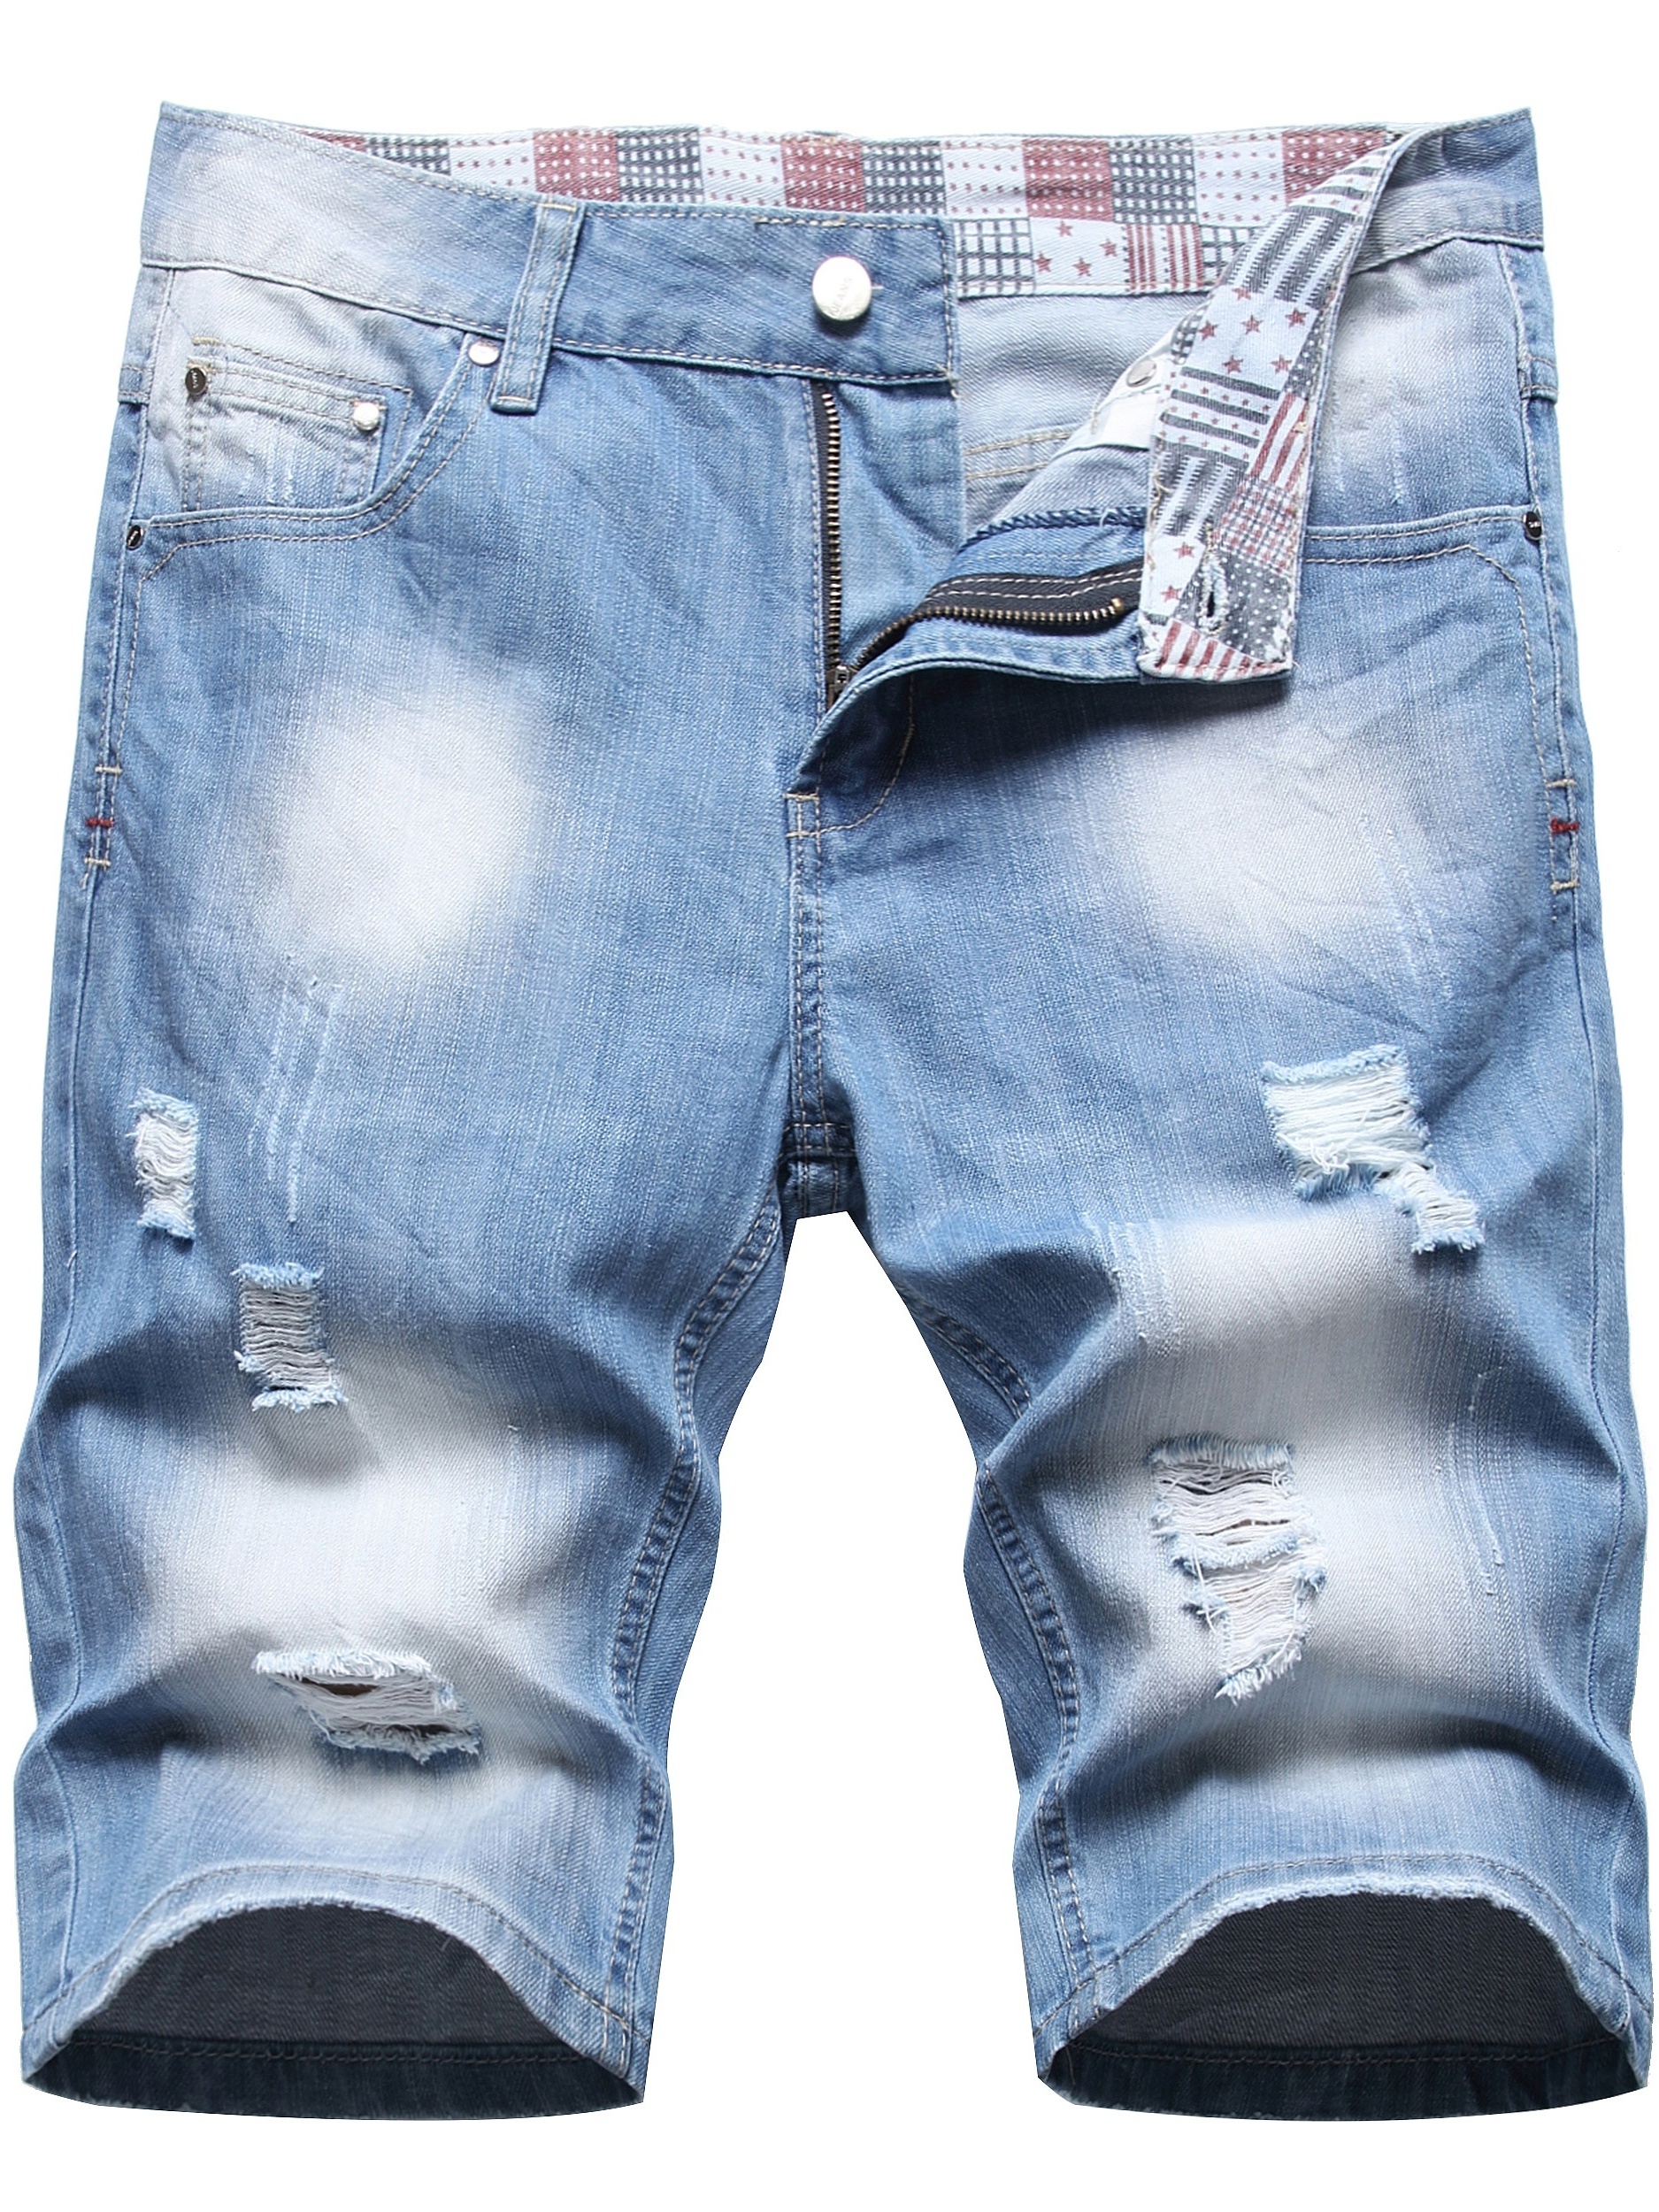 ripped denim shorts mens casual street style distressed denim shorts for summer